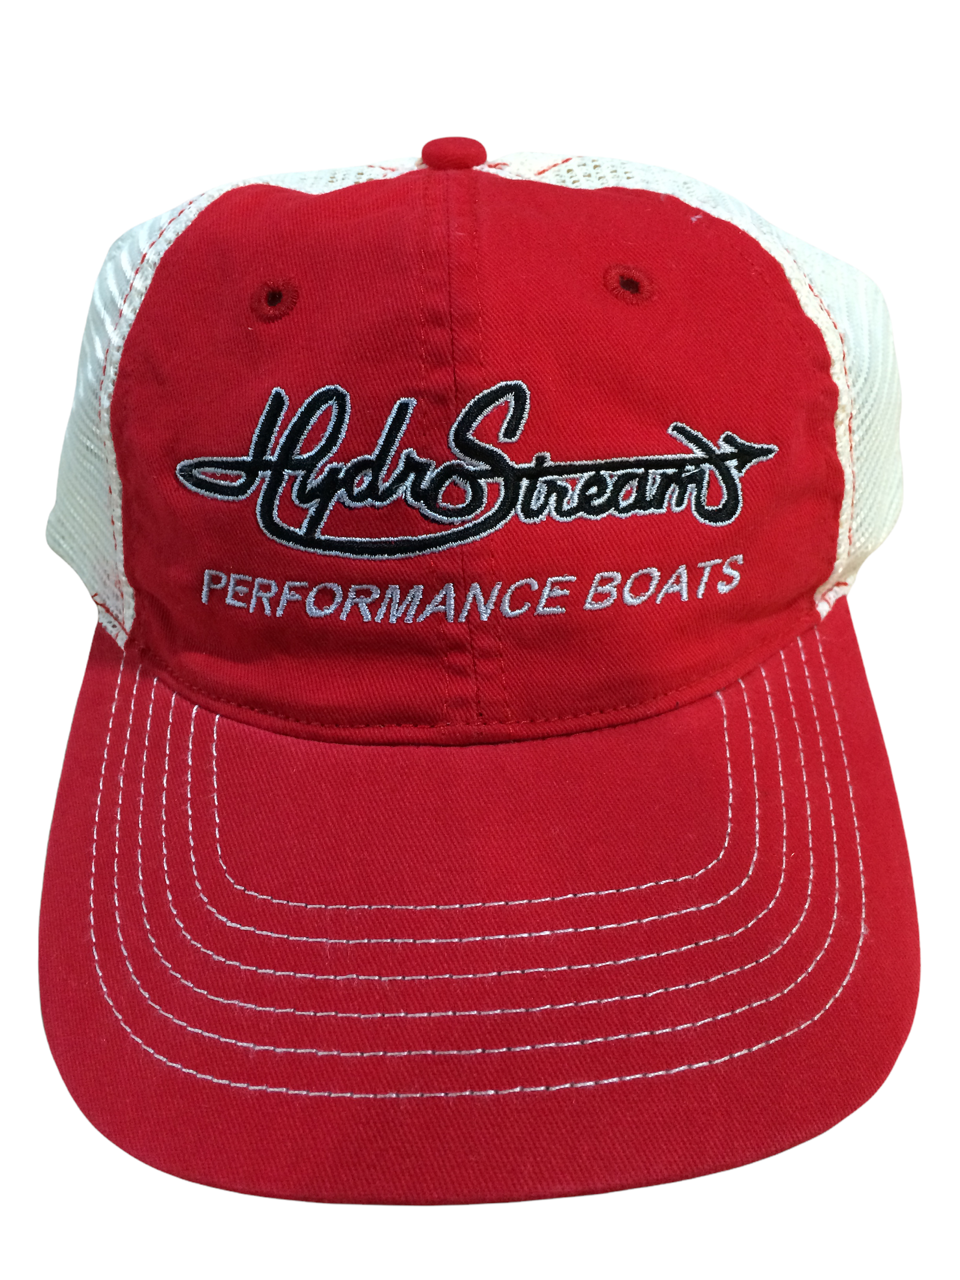 HYDROSTREAM Embroidered, red/white hat